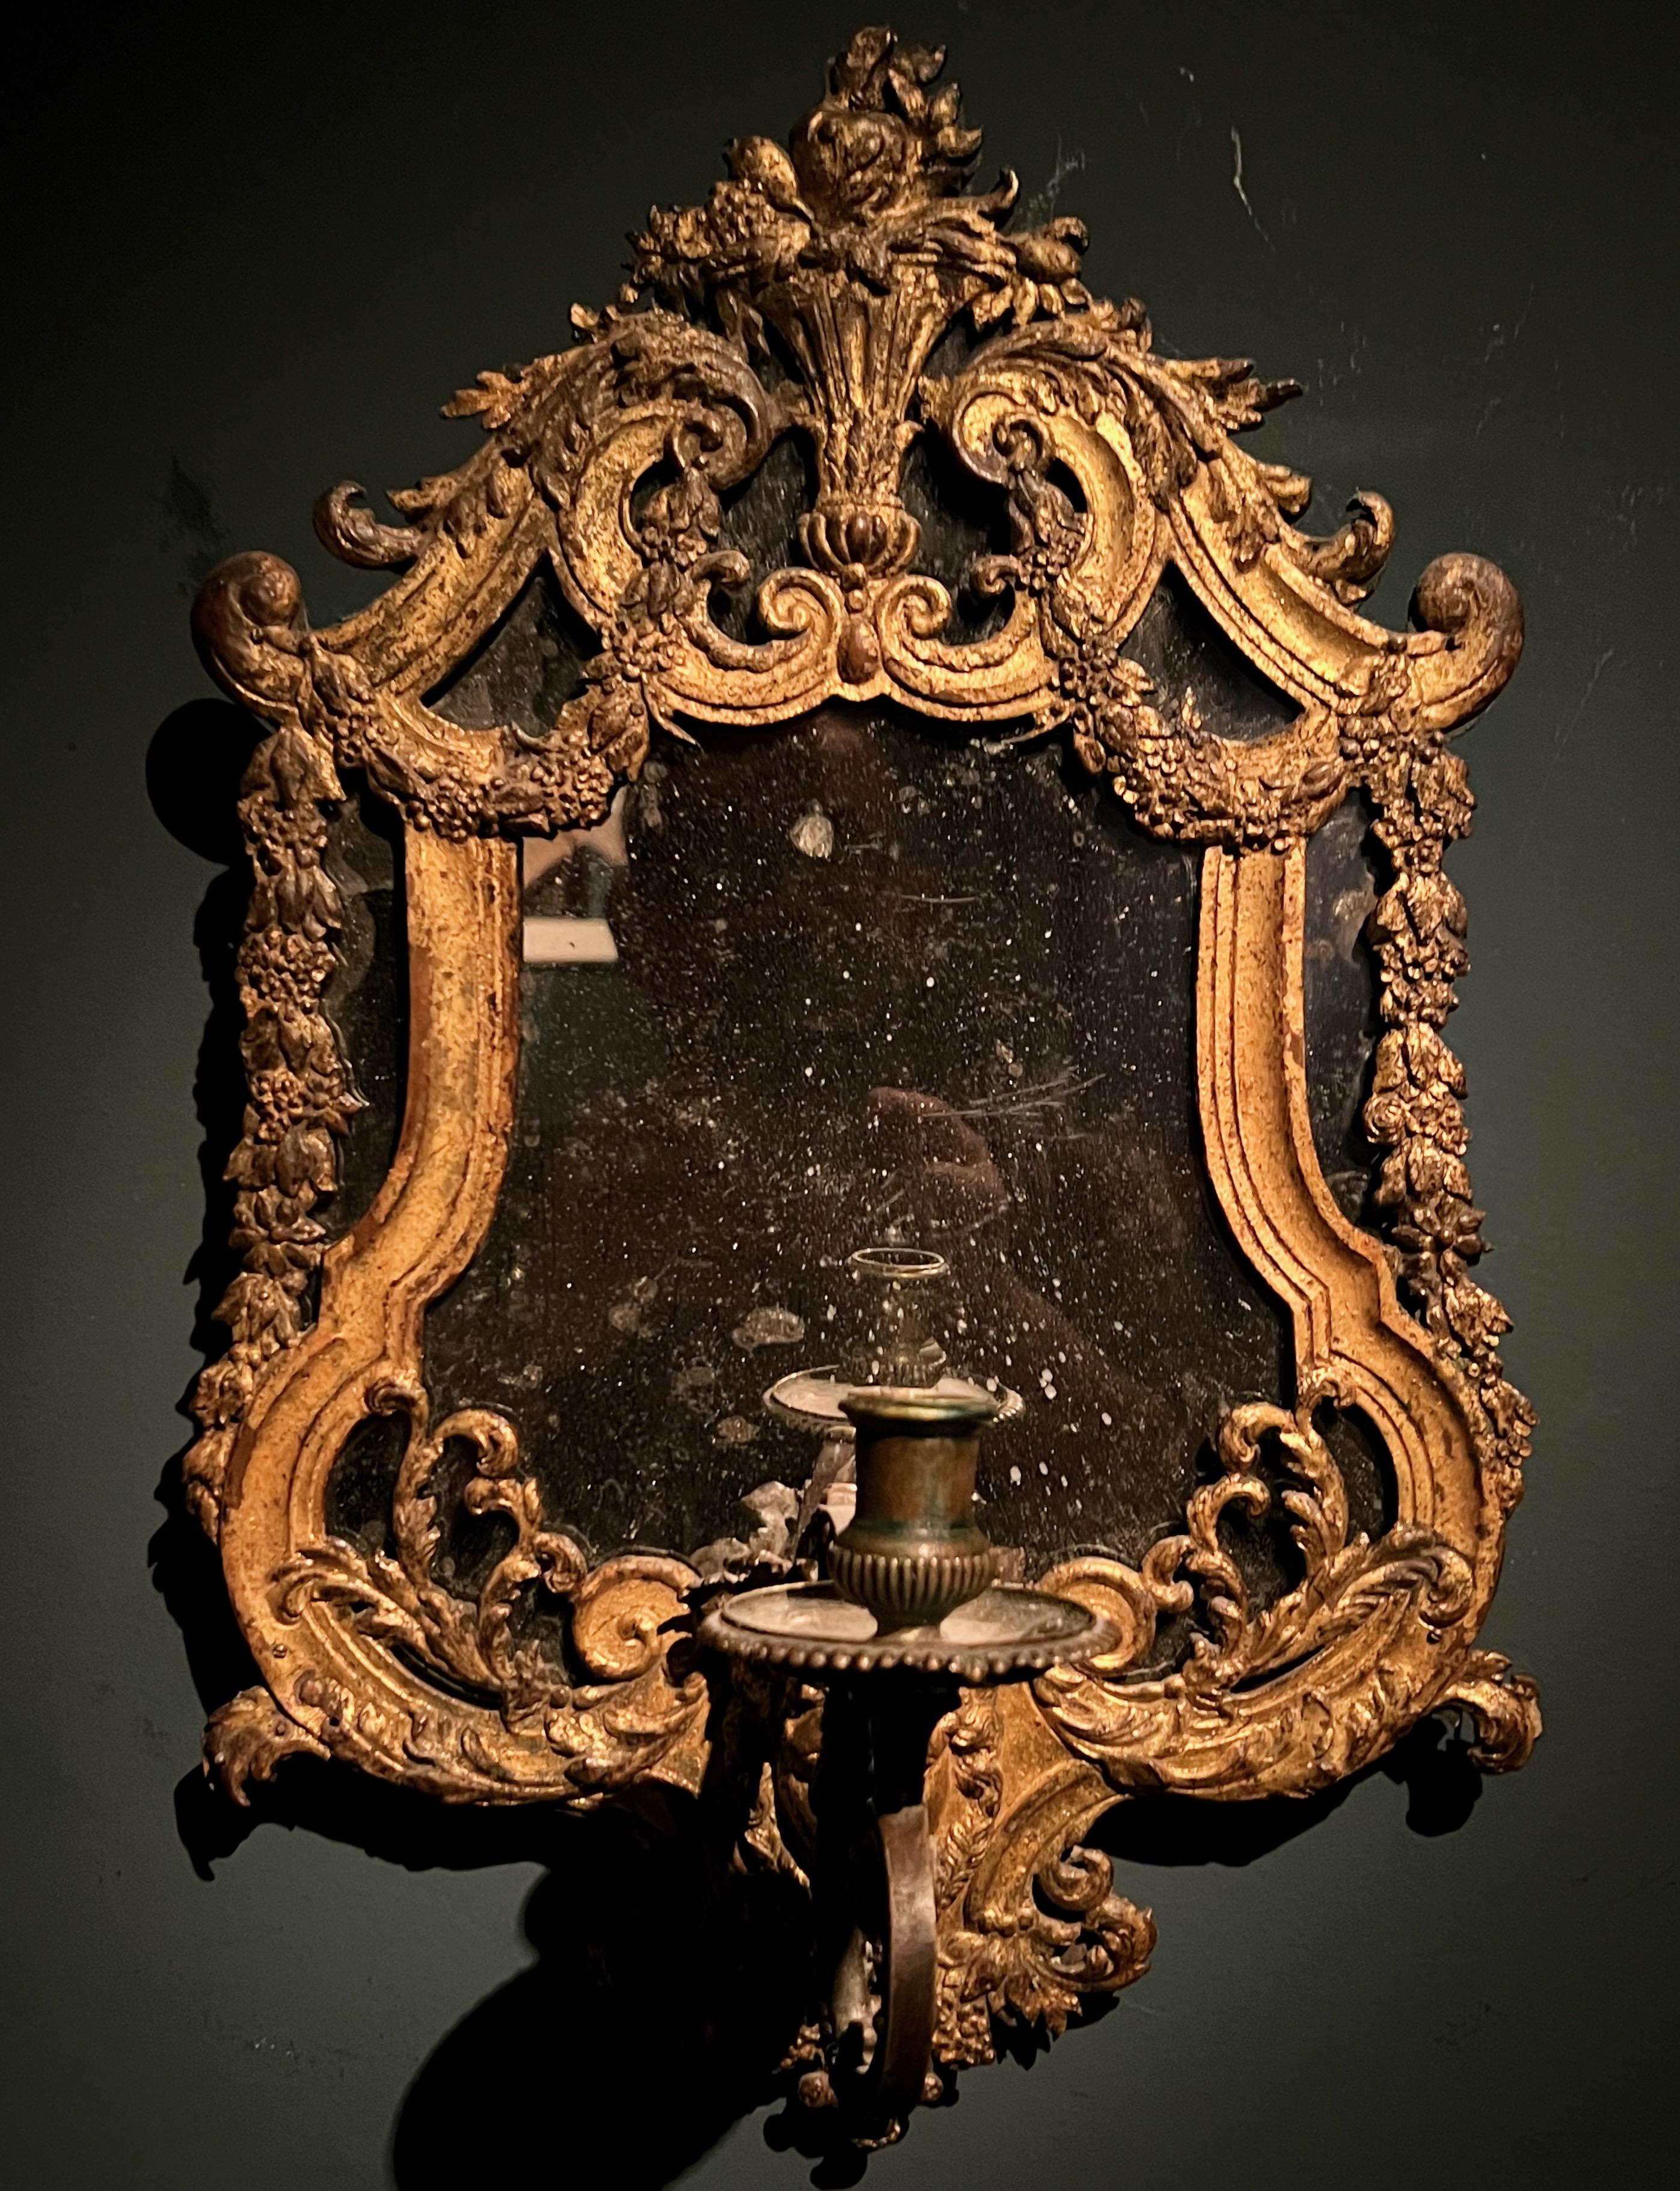 A very charming early 18th century mirror with framework of gilt lead and a bronze candle arm. The cast gilt lead decoration is mounted on a wood base. This mirrored wall sconce is possibly Swedish from the Precht workshops and from the late baroque